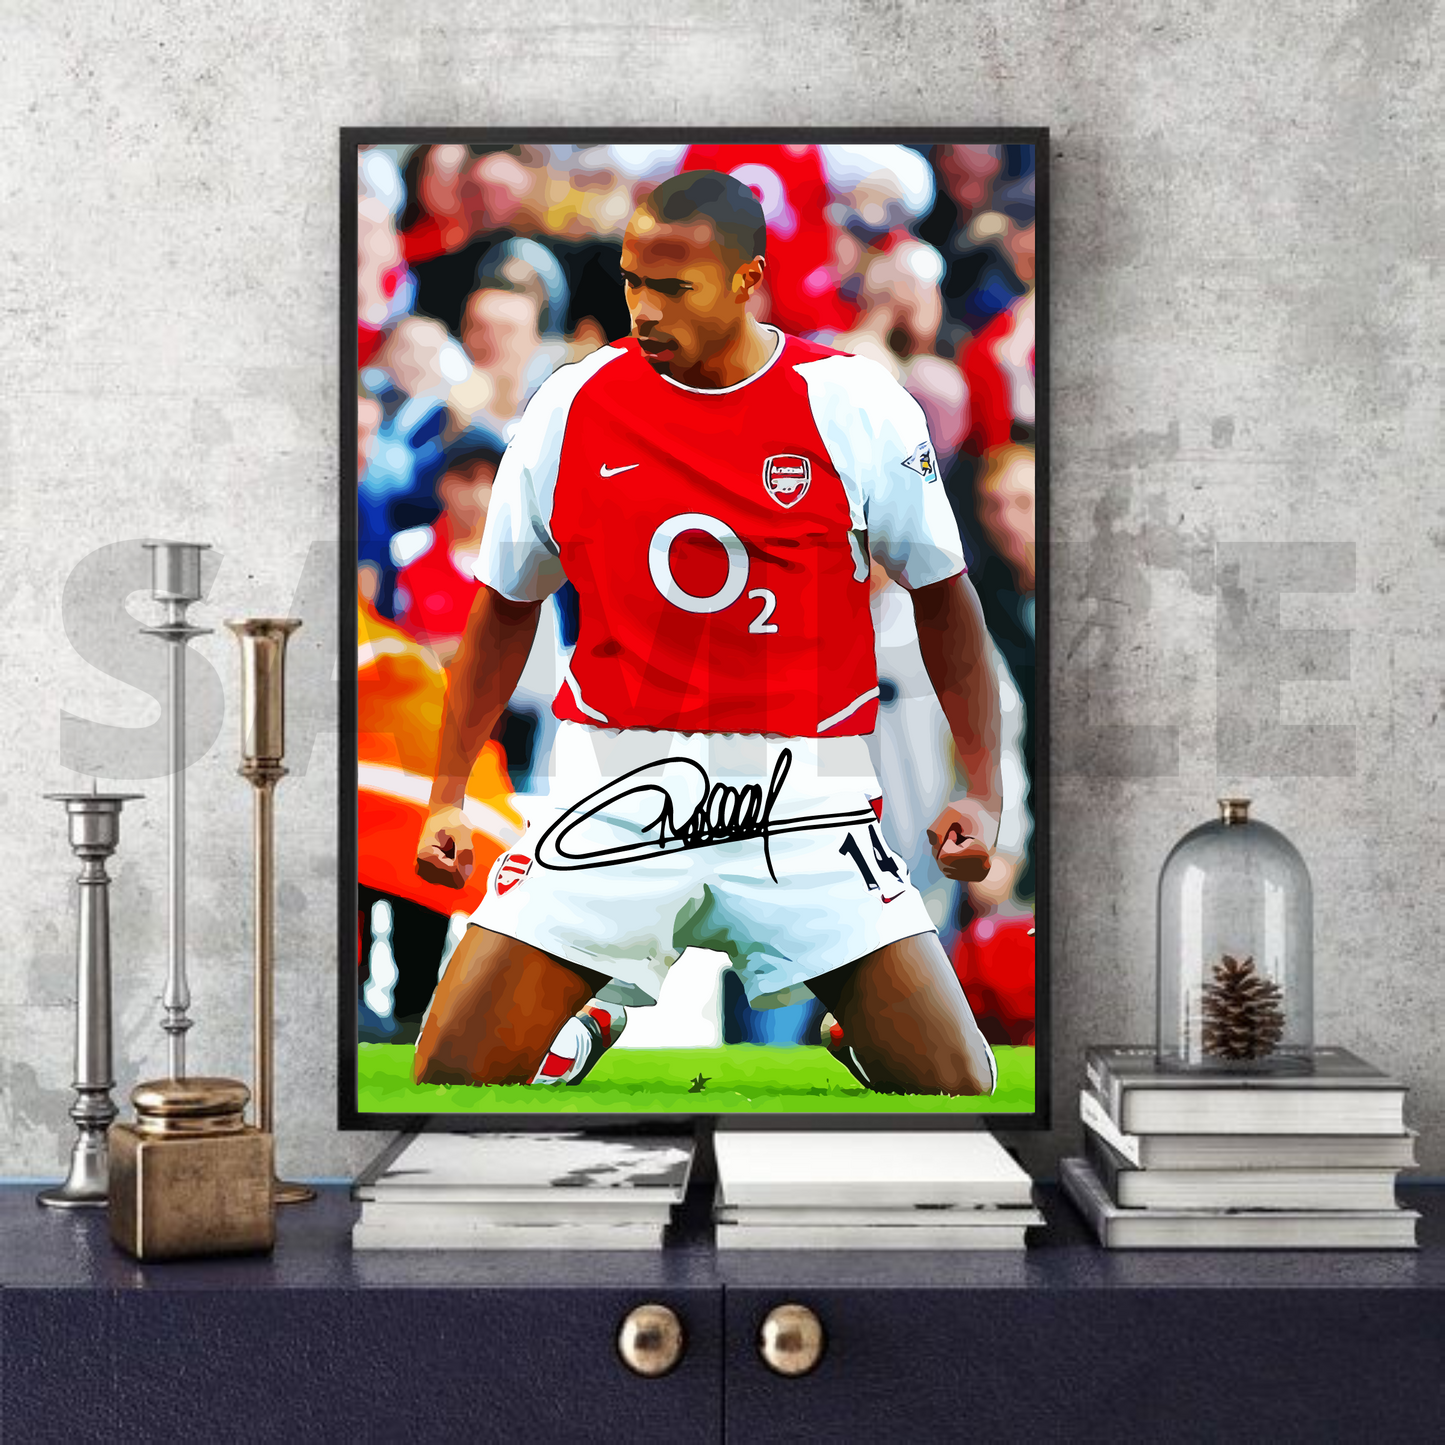 Thierry Henry (Arsenal) #70 - Football print/poster collectable/gift/memorabilia